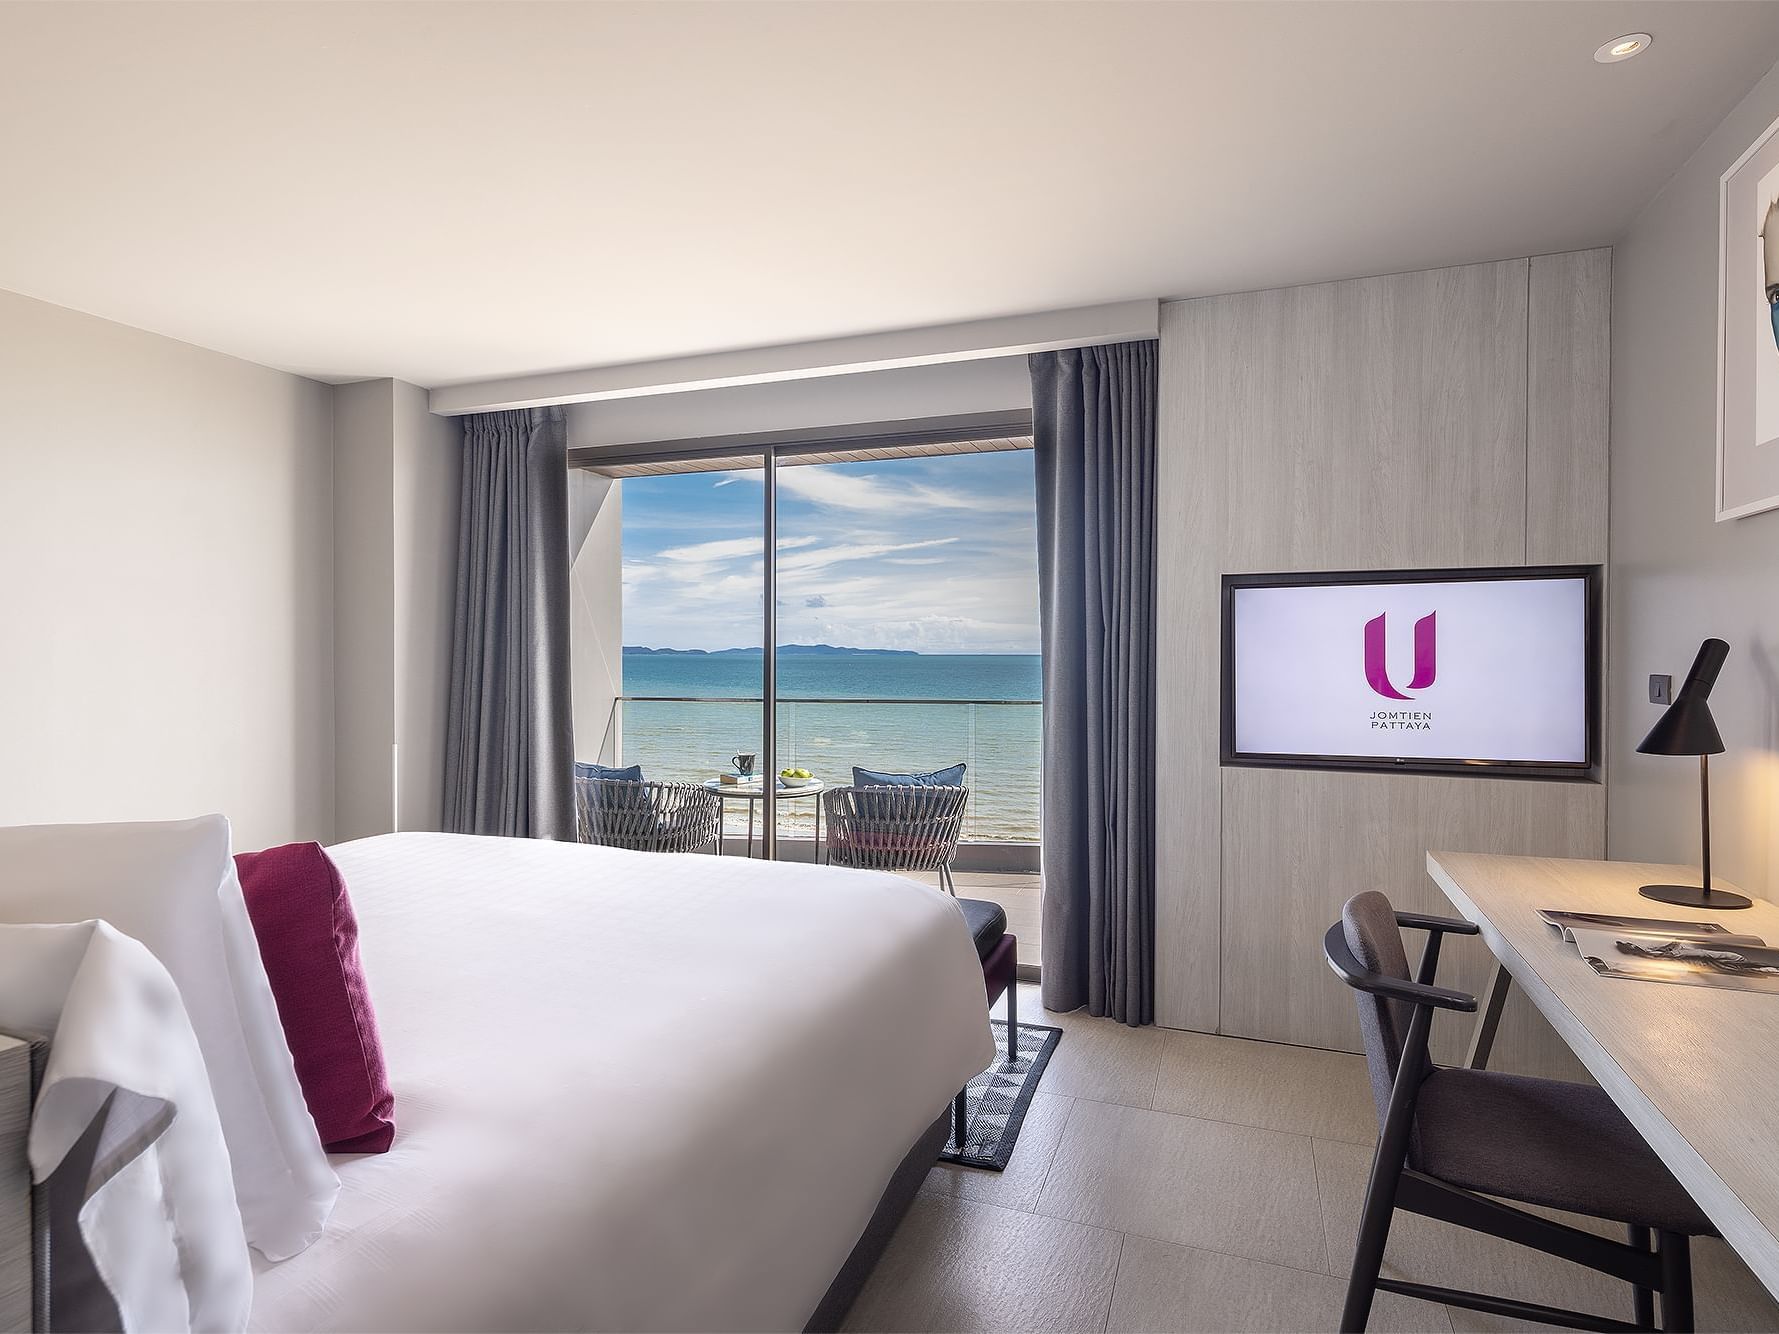 Deluxe Panoramic Seaview Room at U Hotels and Resorts